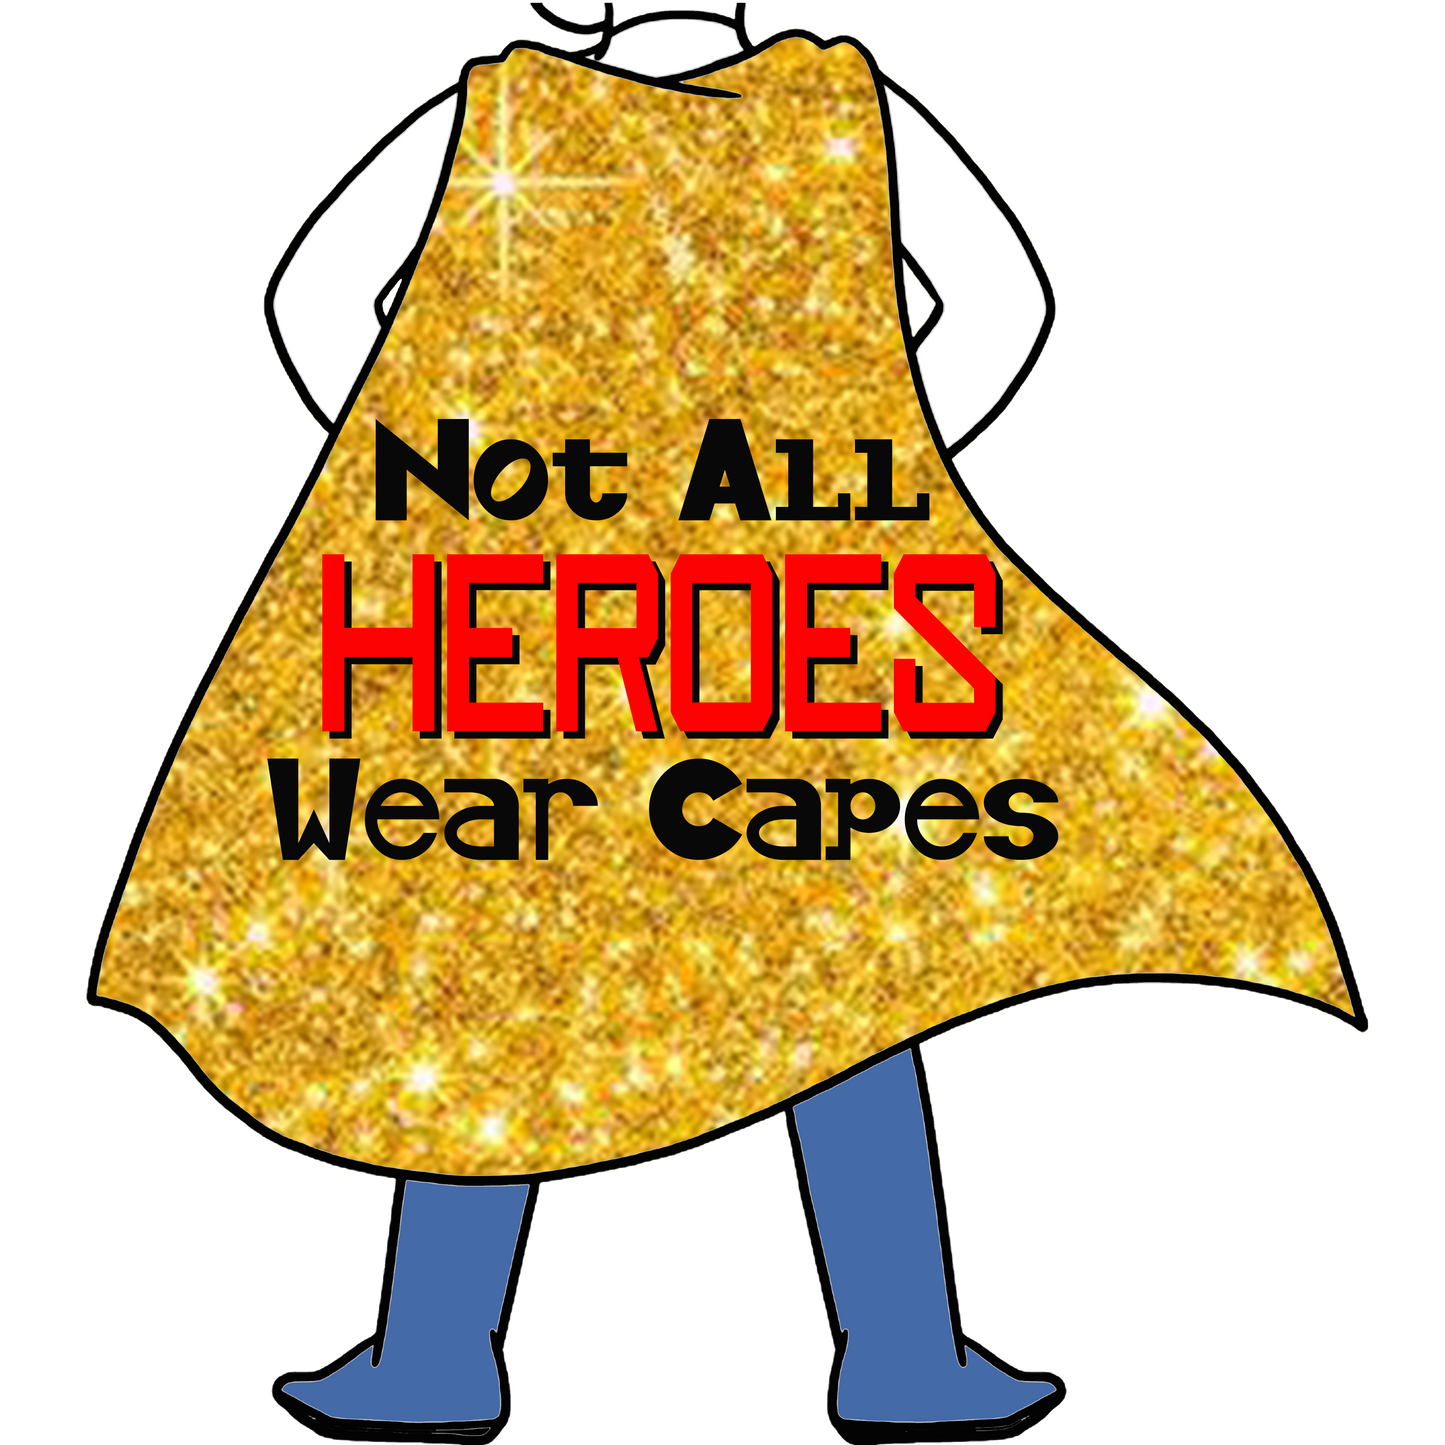 Not All Heroes Wear Capes Impression Sticker